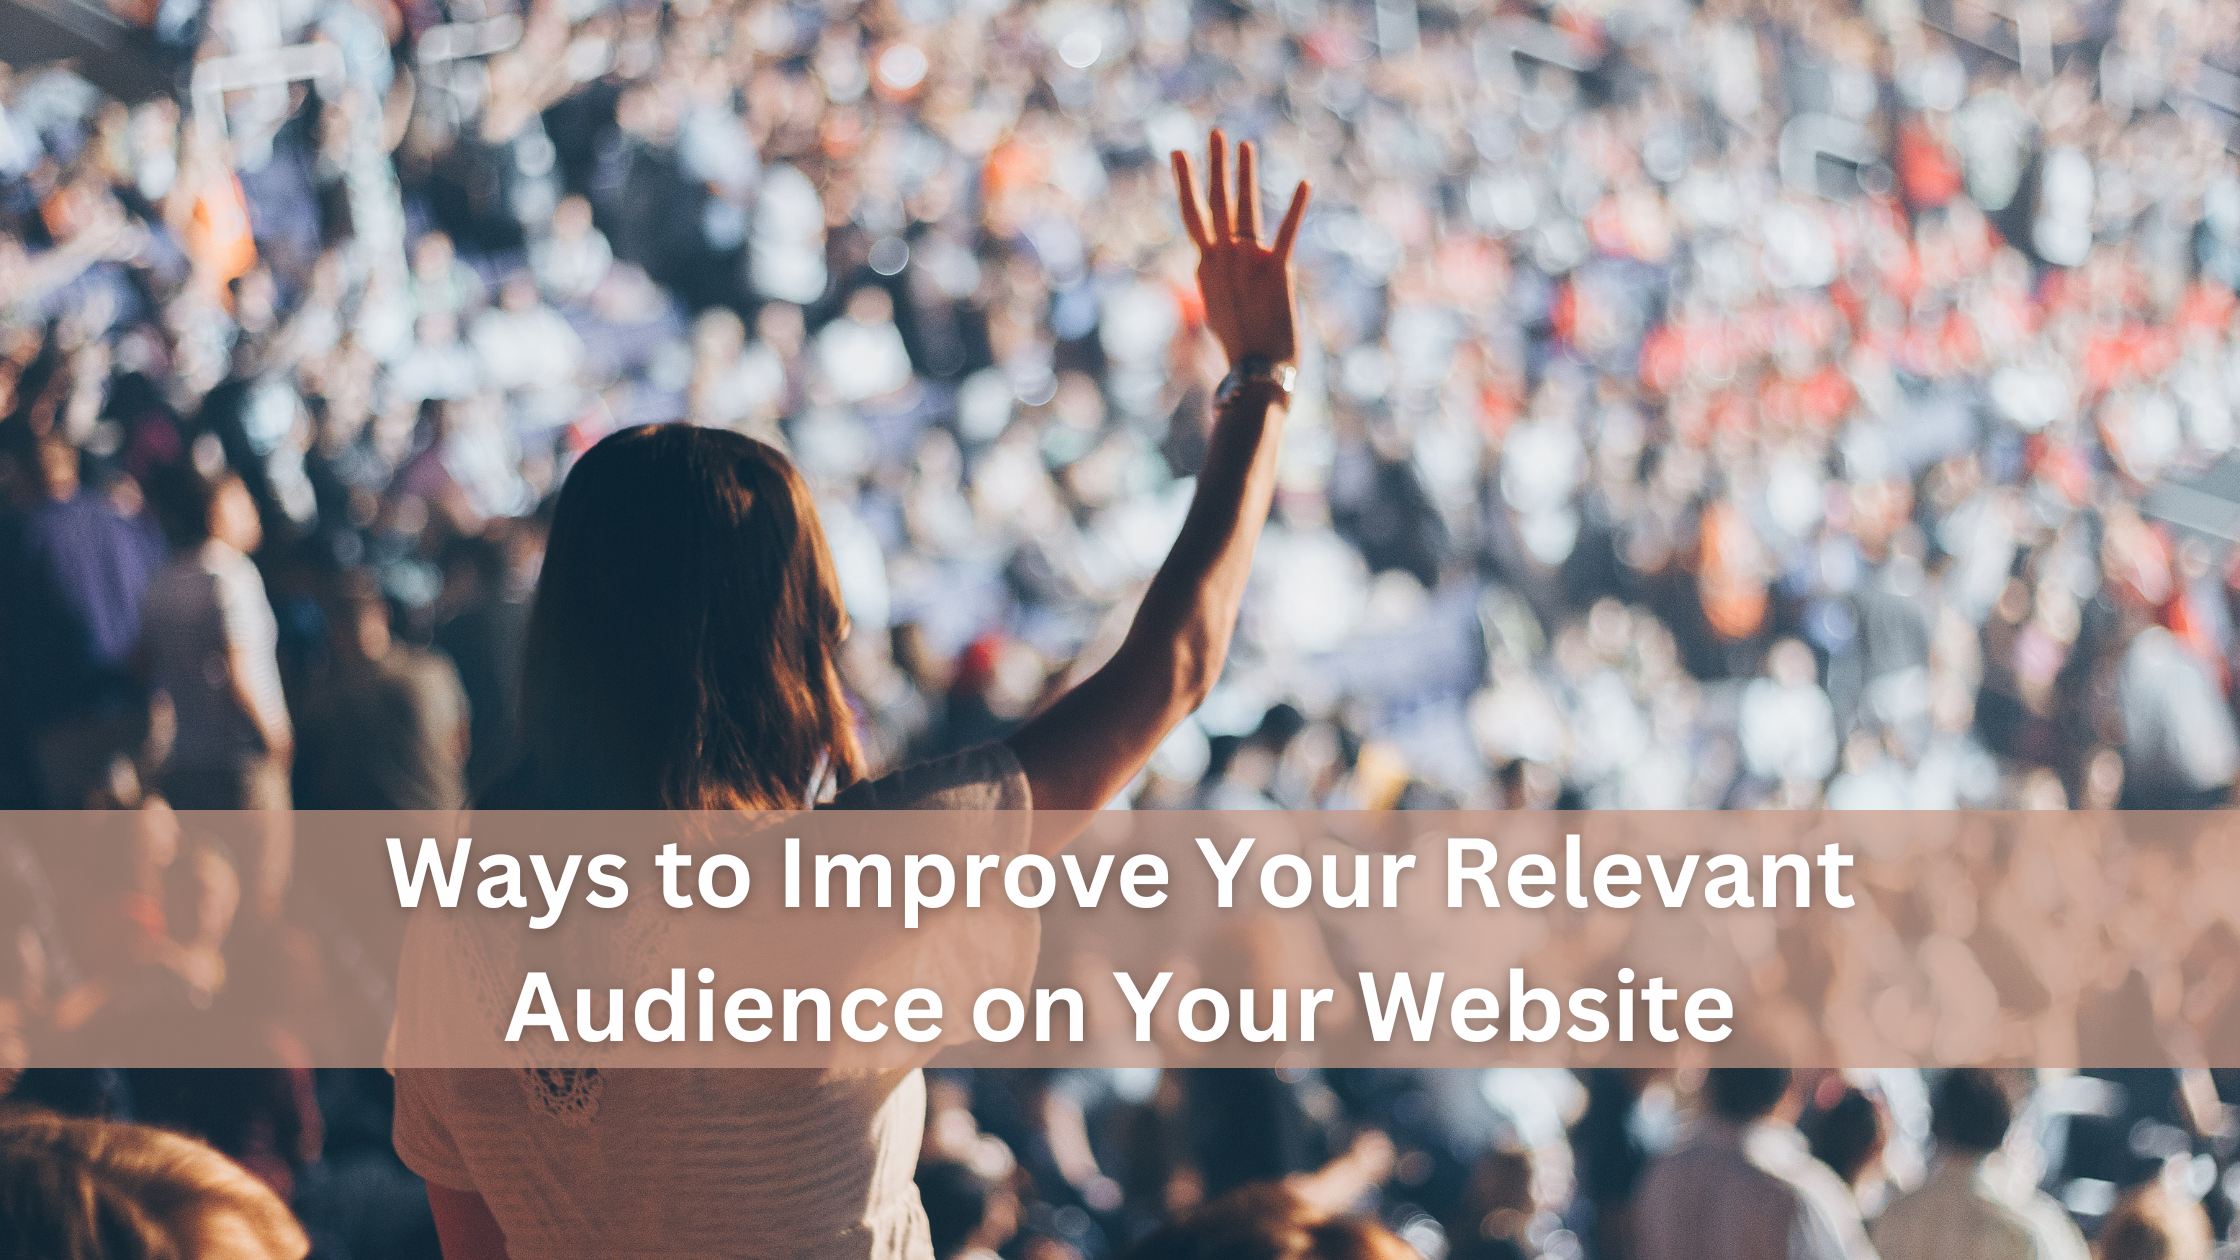 Ways to Improve Your Relevant Audience on Your Website